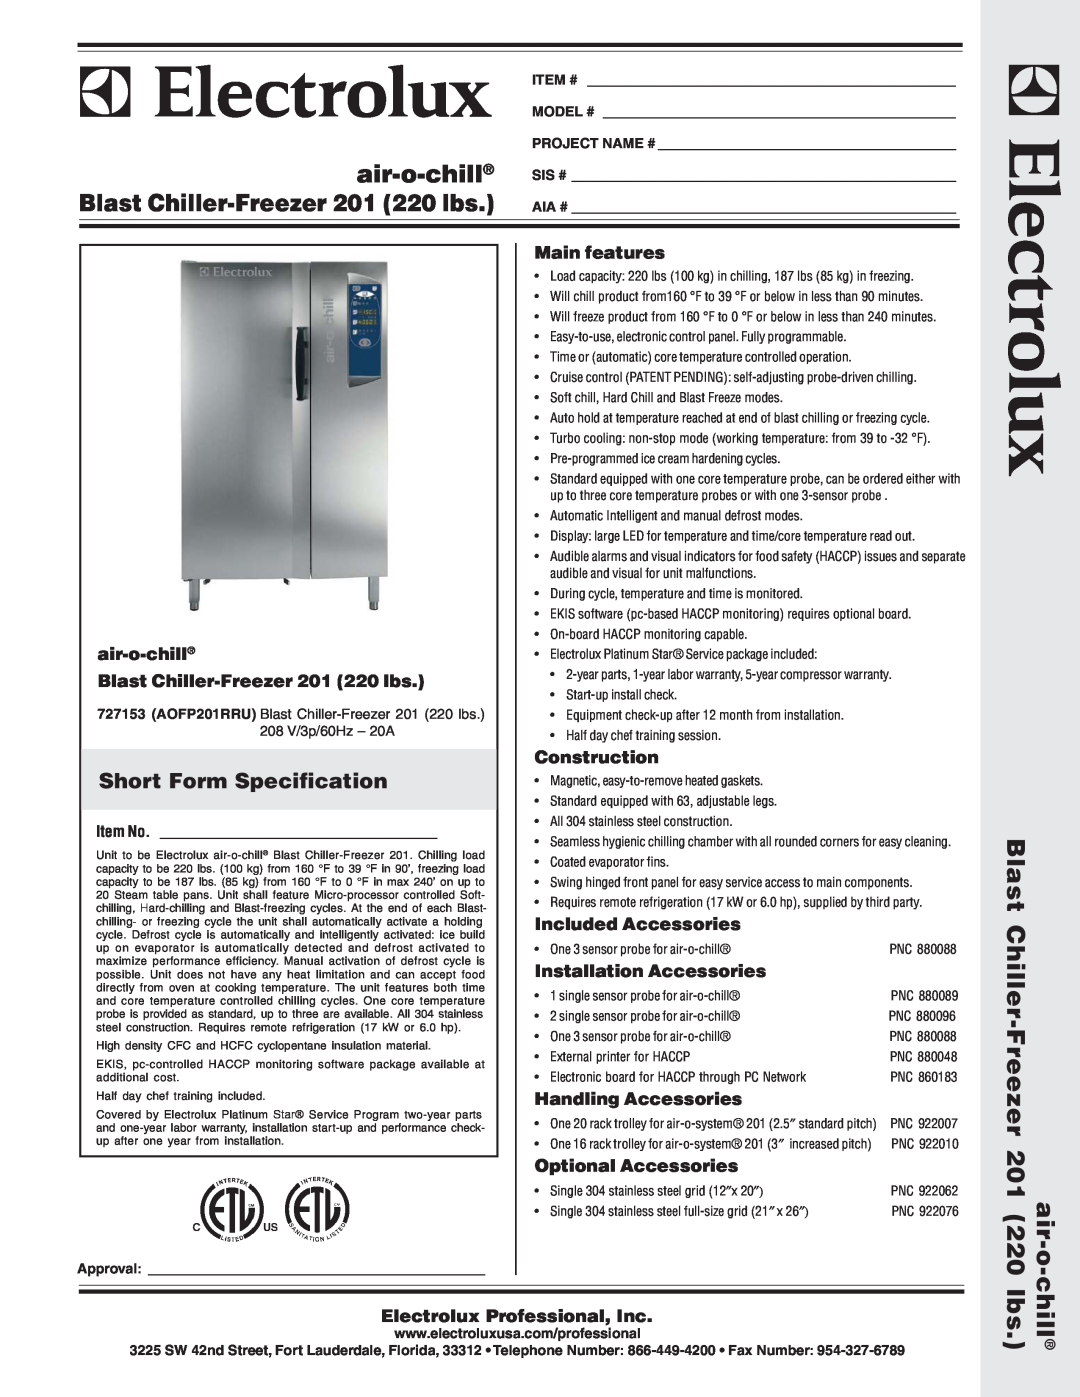 Electrolux AOFP201RRU warranty Short Form Specification, air-o-chill Blast Chiller-Freezer 201 220 lbs, Main features 